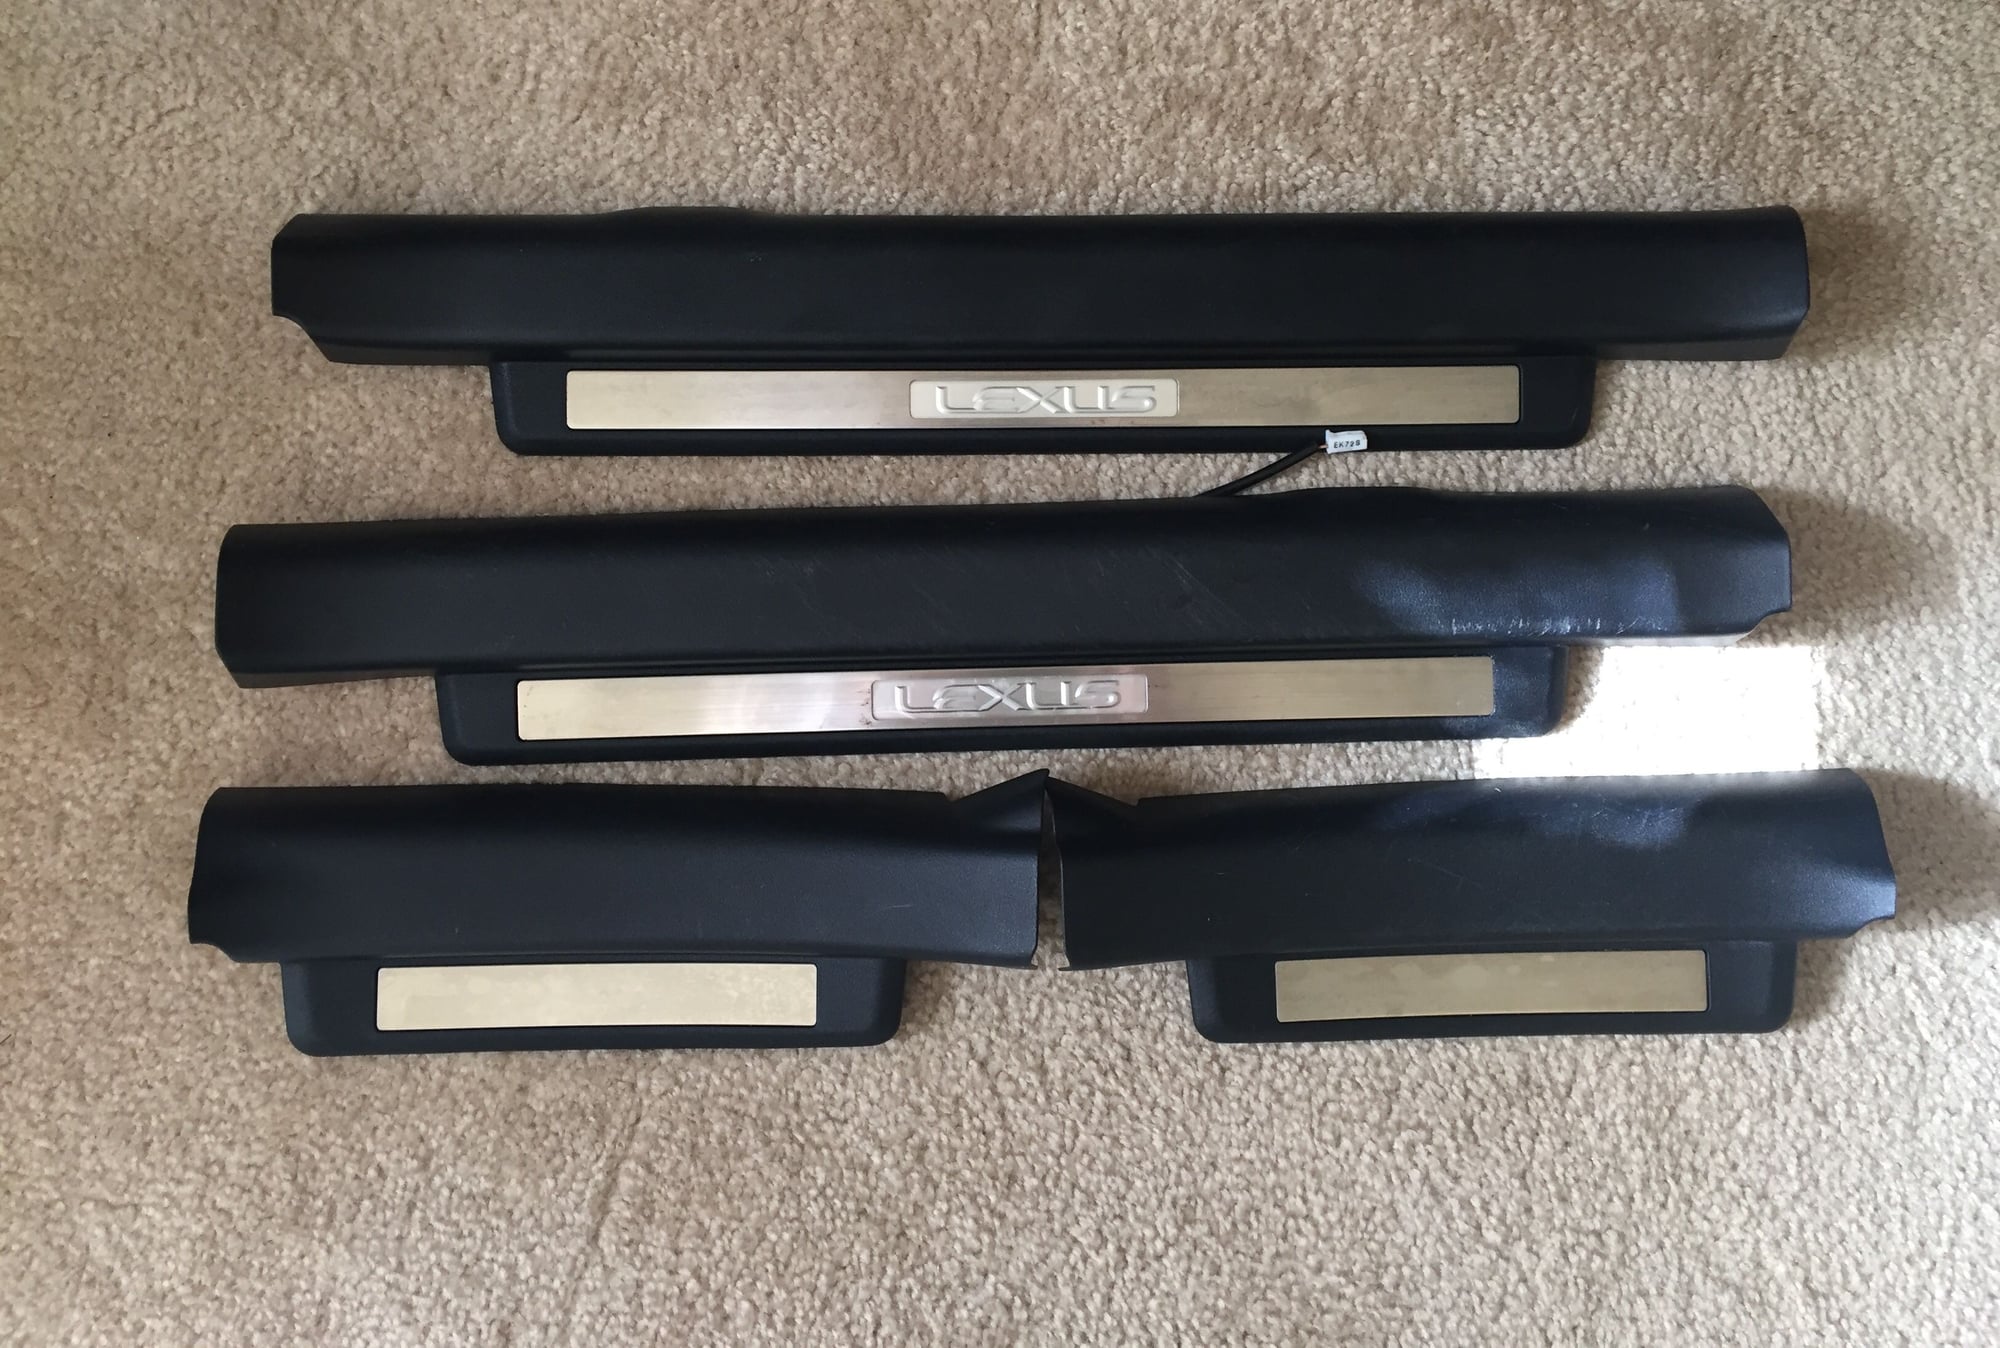 Interior/Upholstery - FS: 06-13 IS Black Door Sills with White LED Illumination - Used - 2006 to 2013 Lexus IS250 - 2006 to 2013 Lexus IS350 - 2006 to 2013 Lexus IS F - Nva, VA 22209, United States